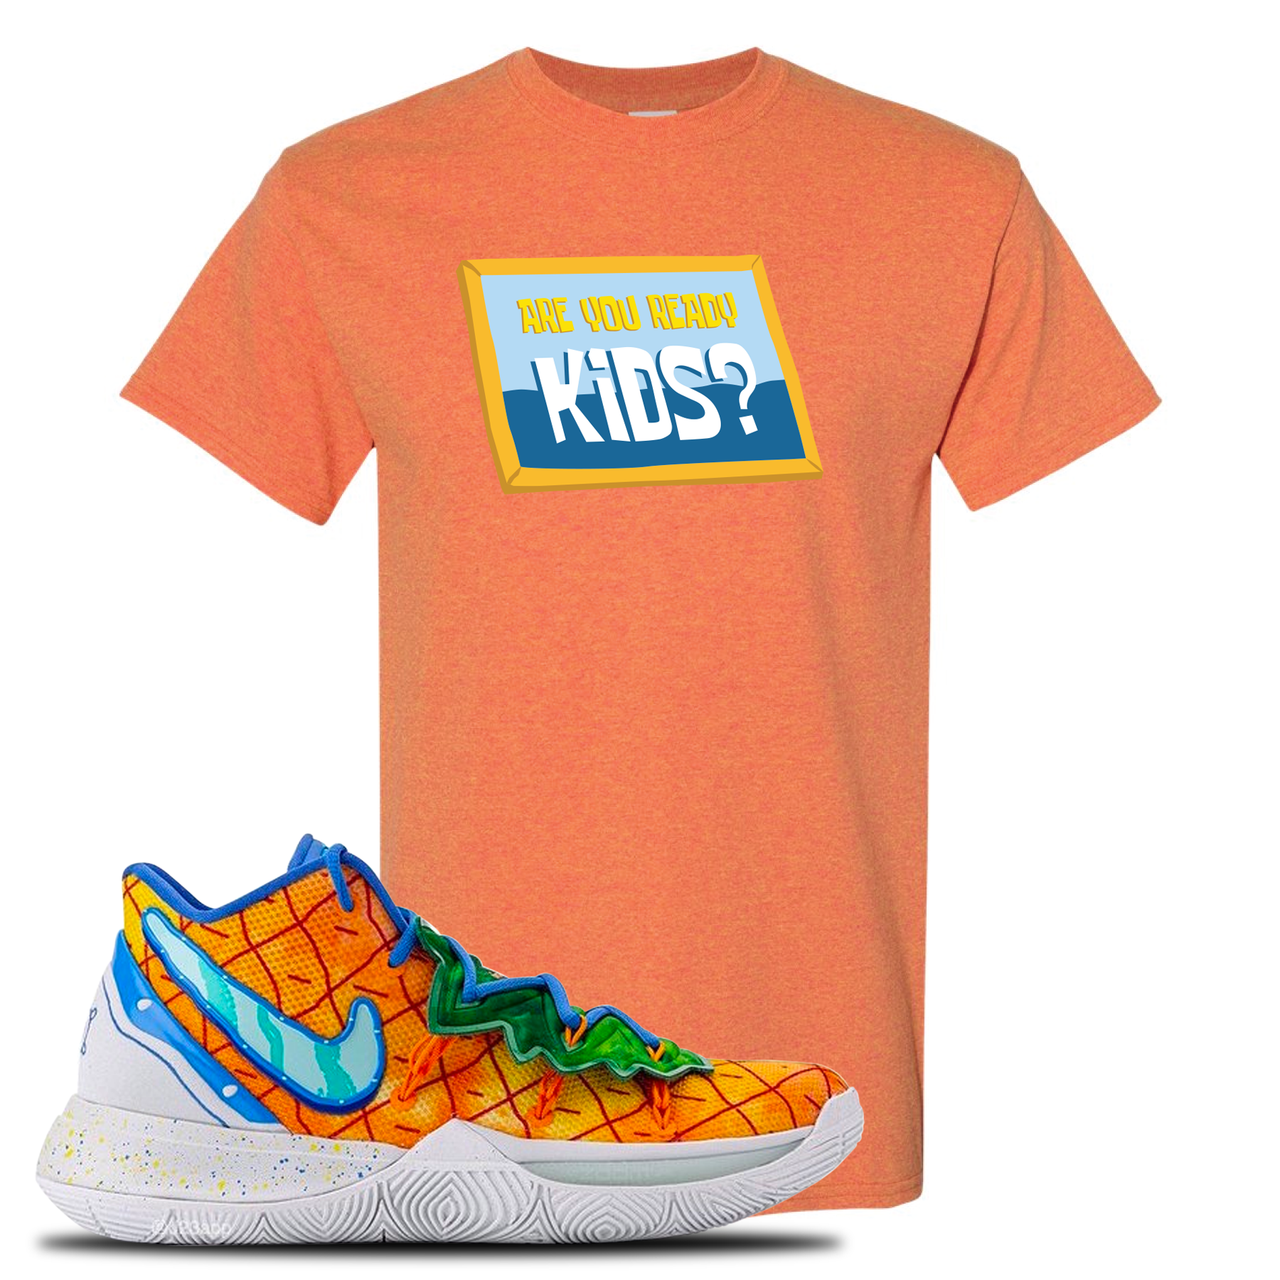 Kyrie 5 Pineapple House Are You Ready Kids? Sunset Sneaker Hook Up T-Shirt